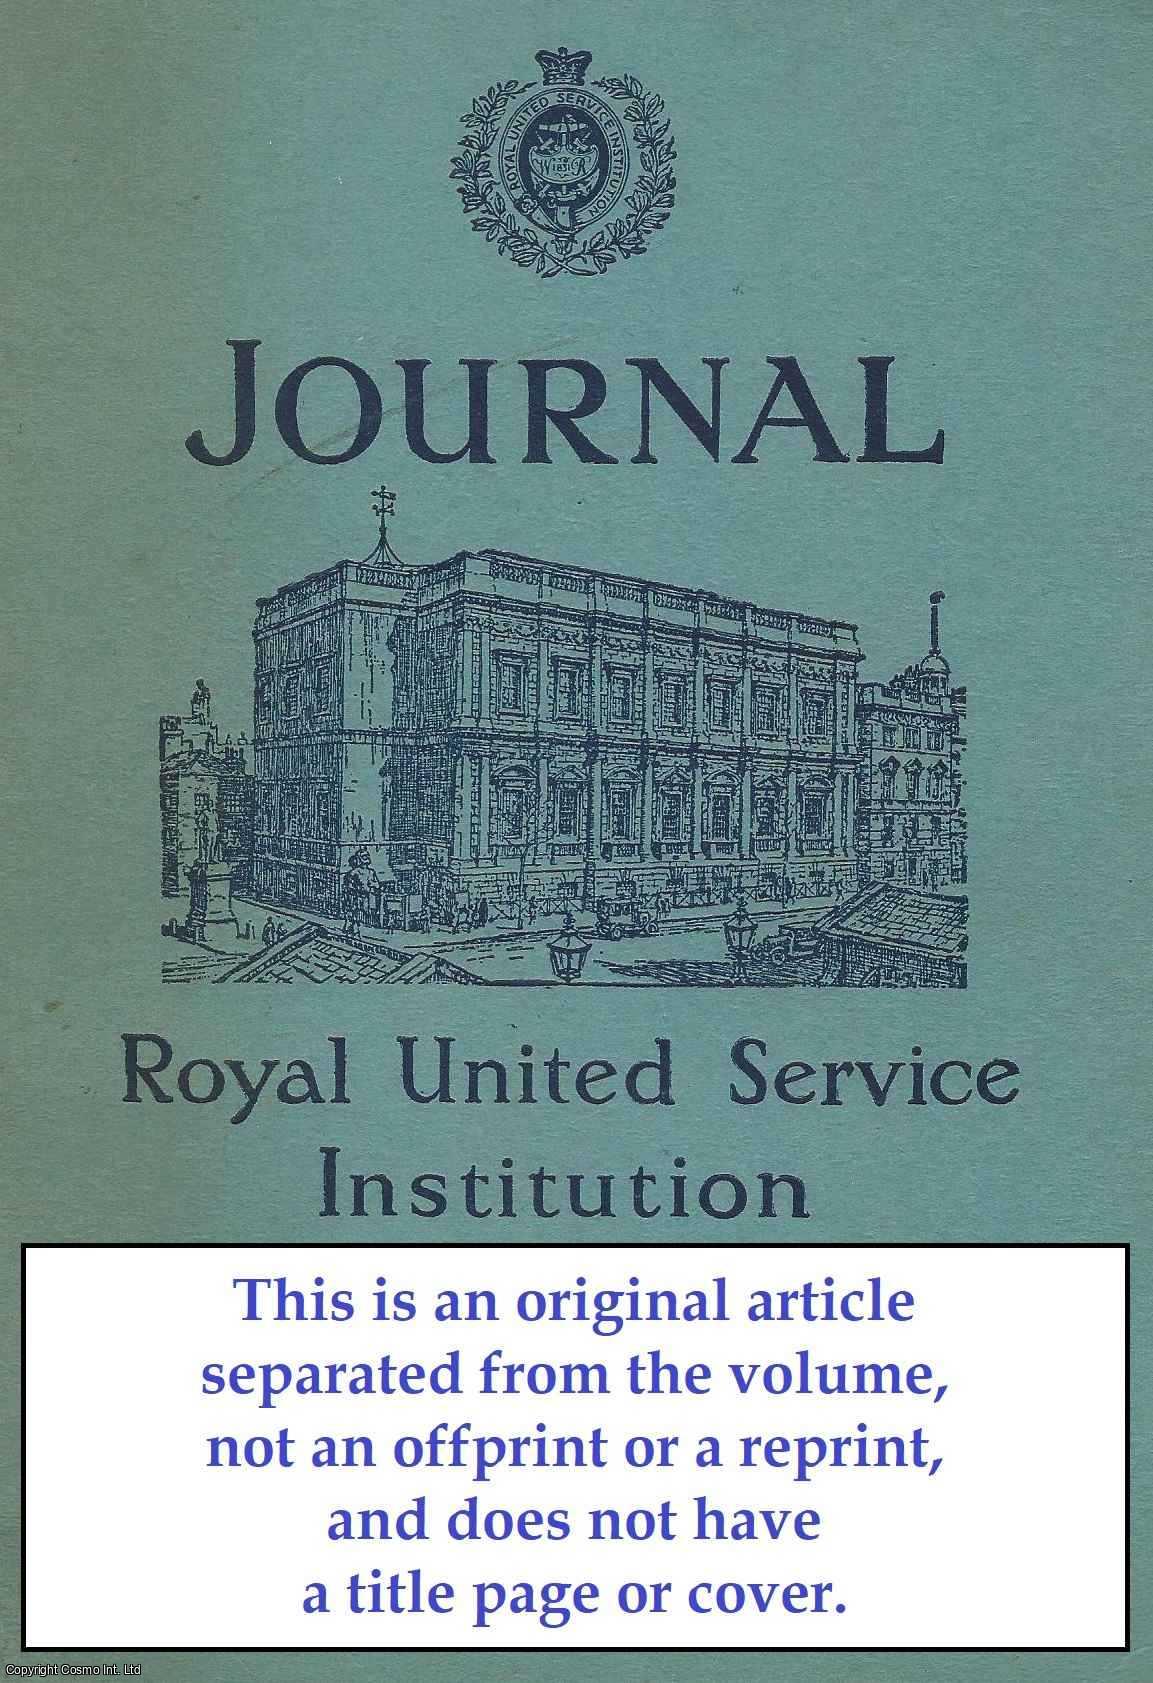 --- - Some Thoughts on The Home Guard. An original article from Journal of The Royal United Service Institution, 1955.